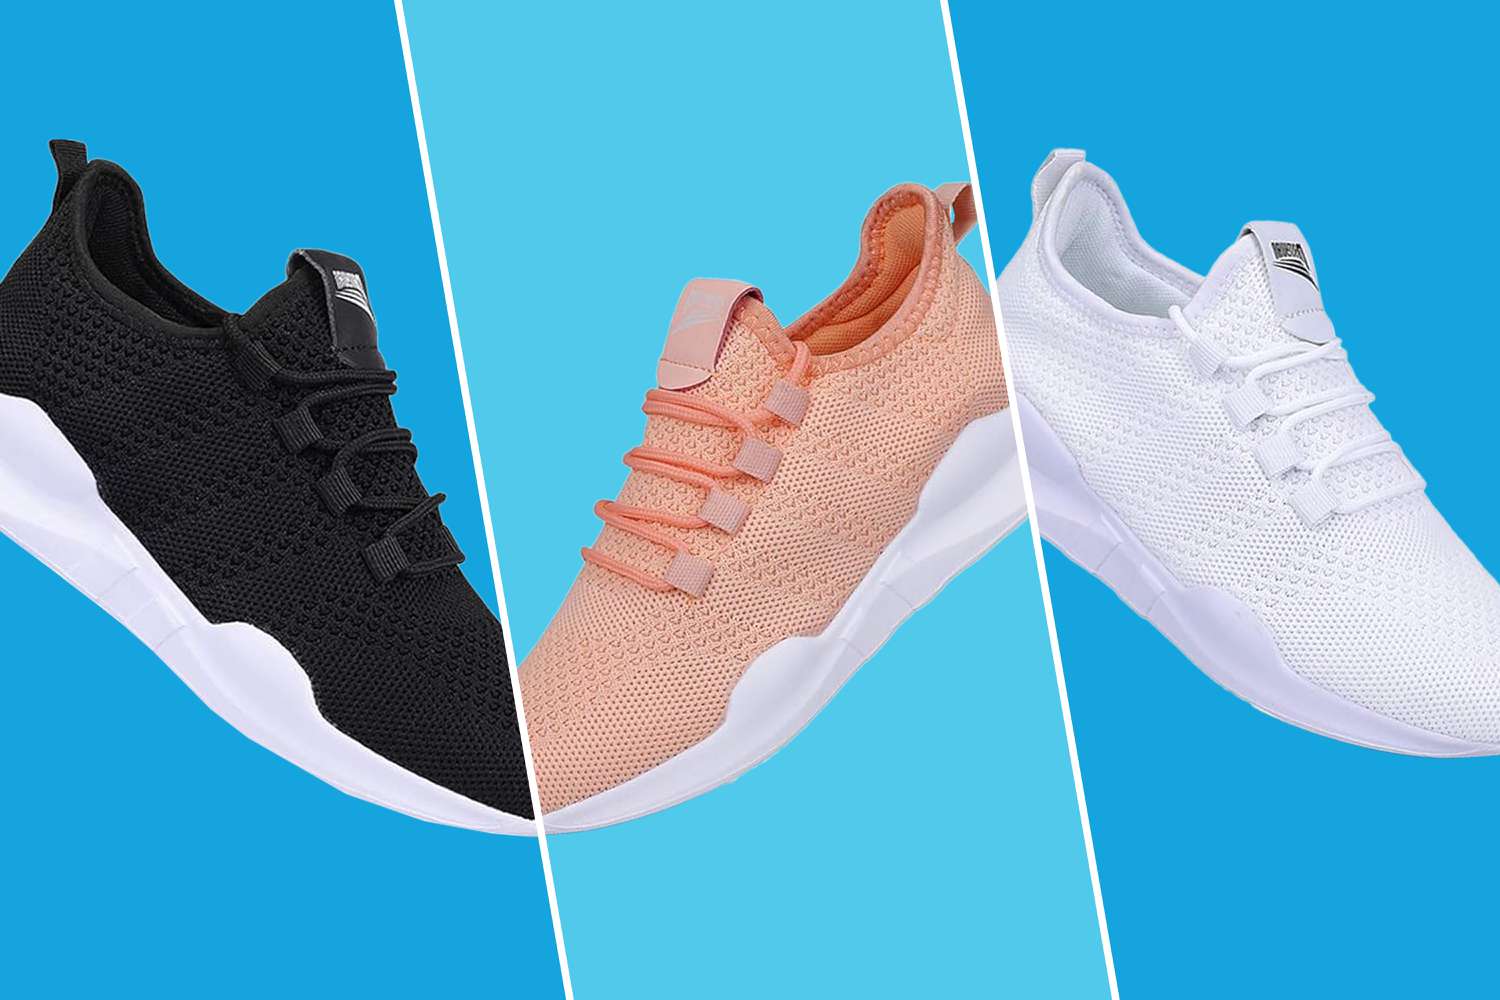 You Can Snag These $80 Sneakers That Feel Like âWalking on Airâ for as Little as $18 at Amazon Tout